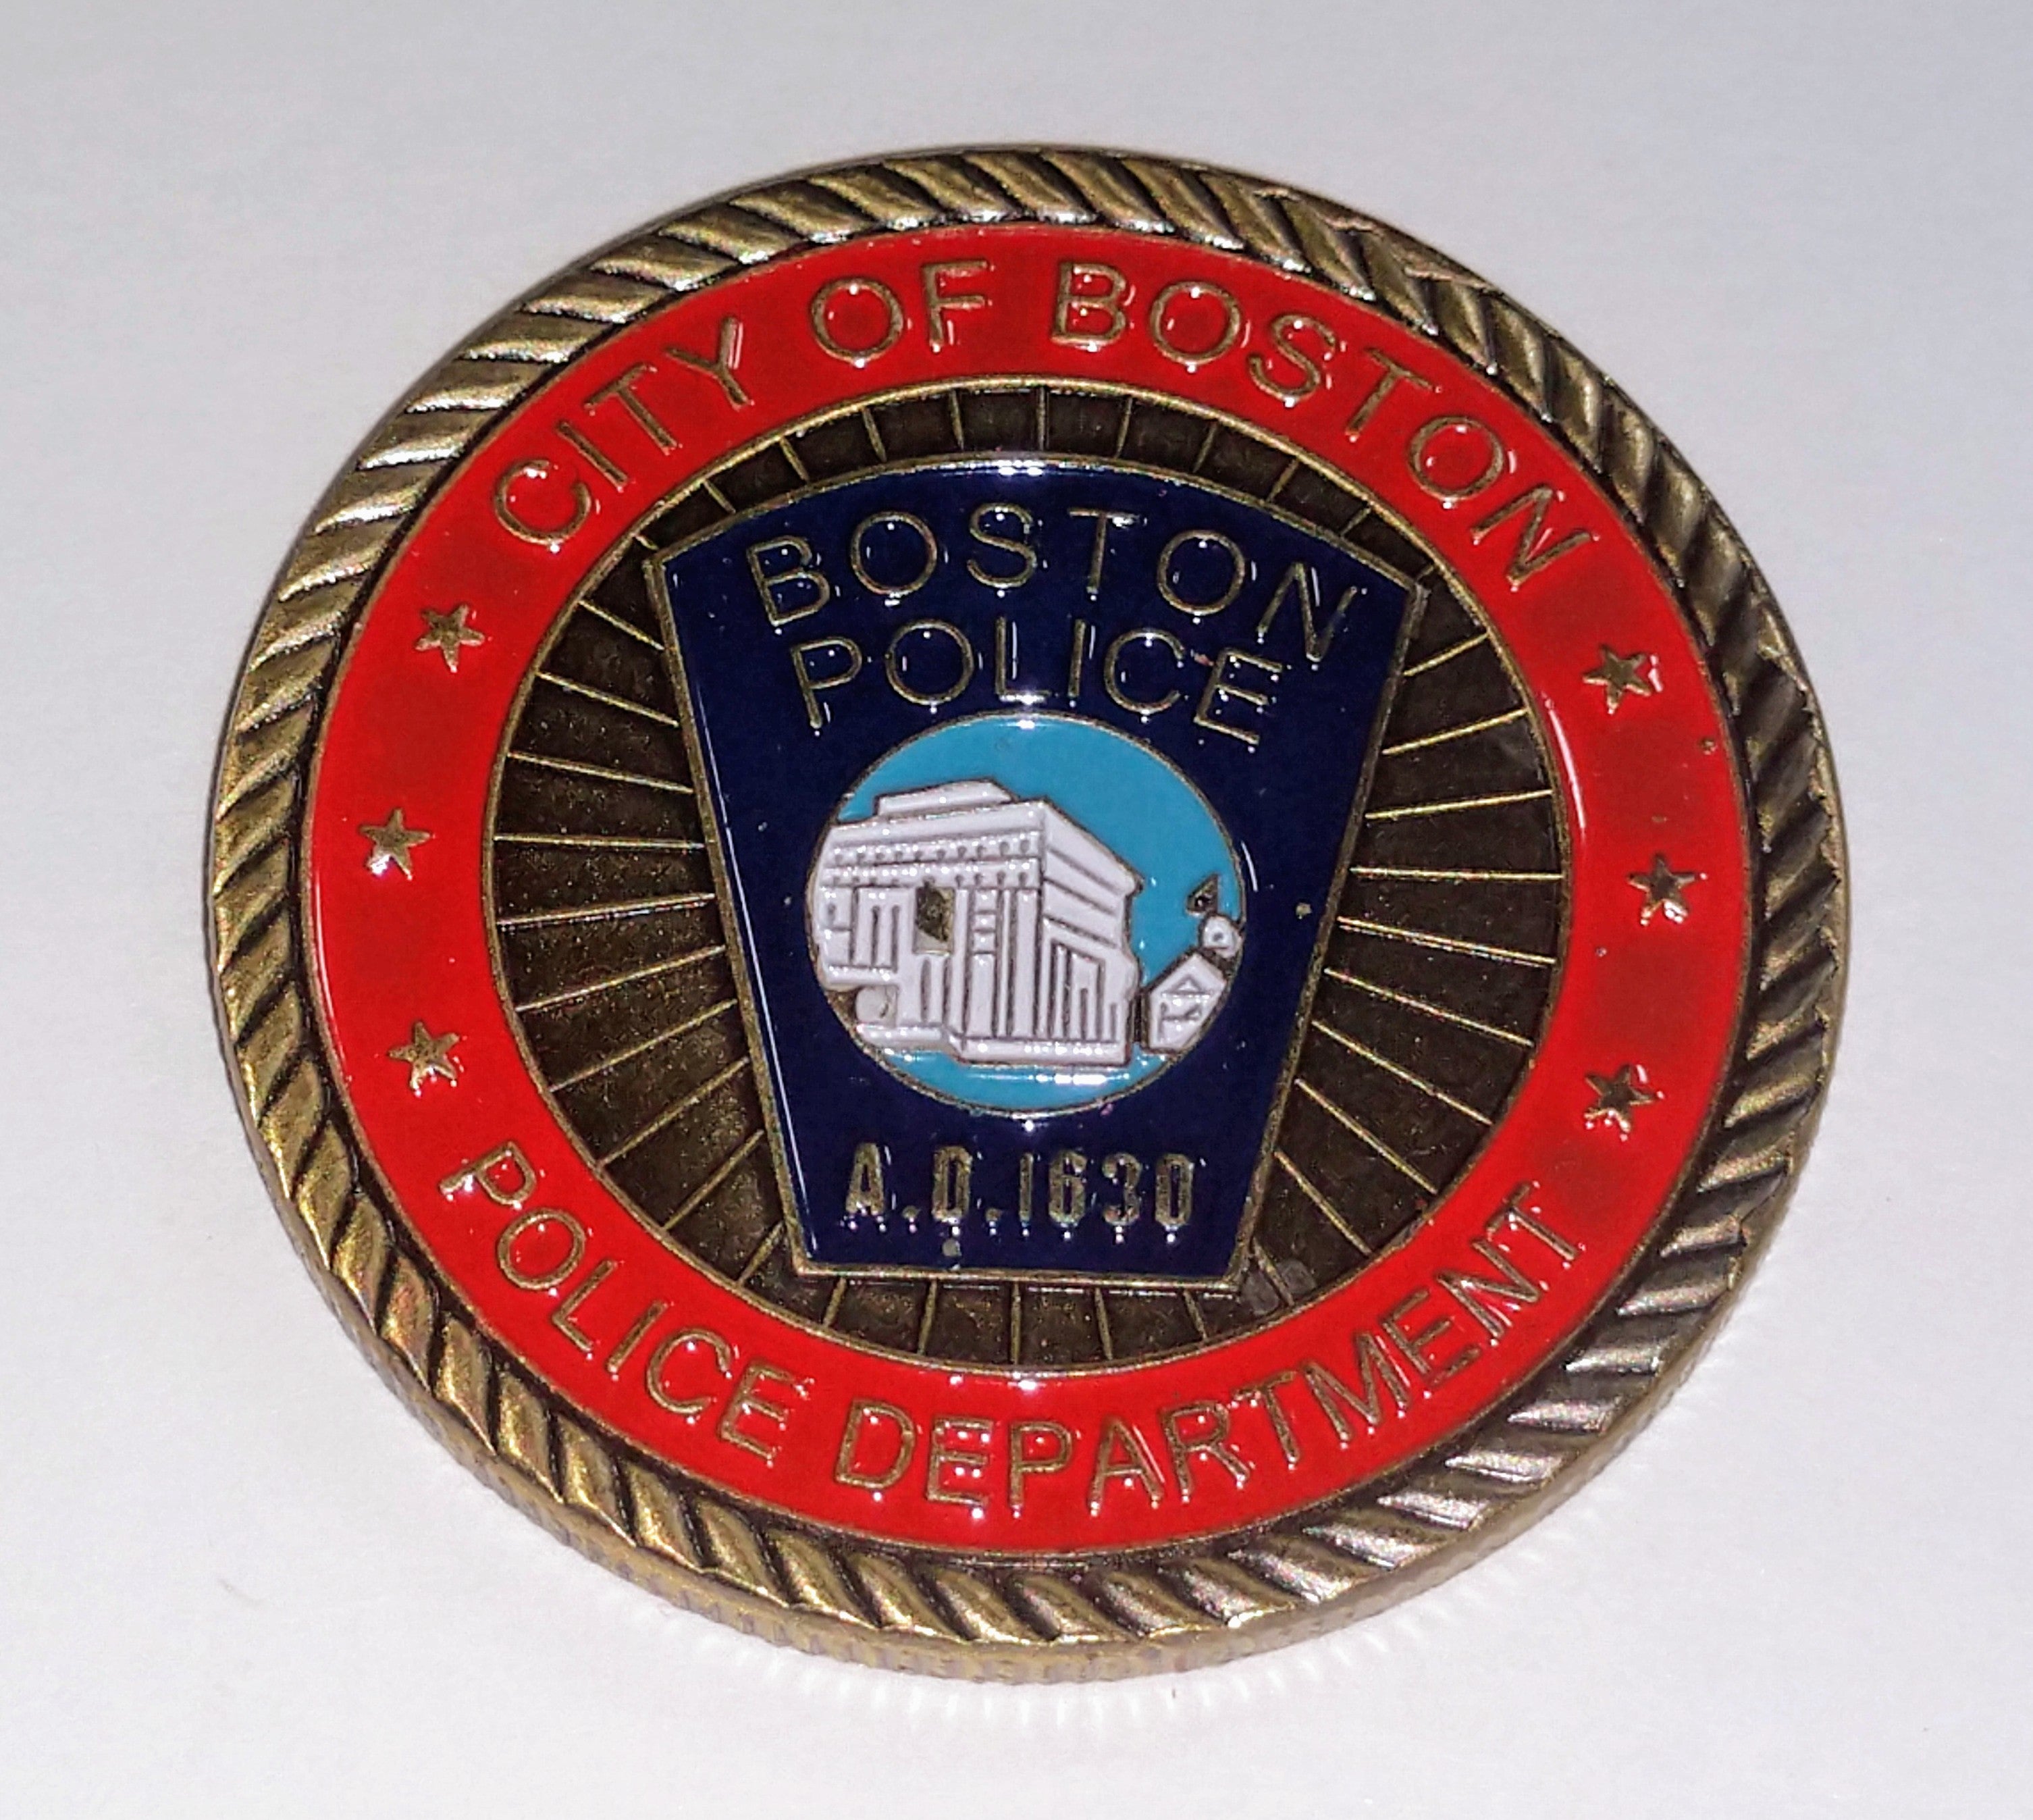 BOSTON POLICE ANTIQUED #SK8905 COLORIZED ART ROUND – Vintage